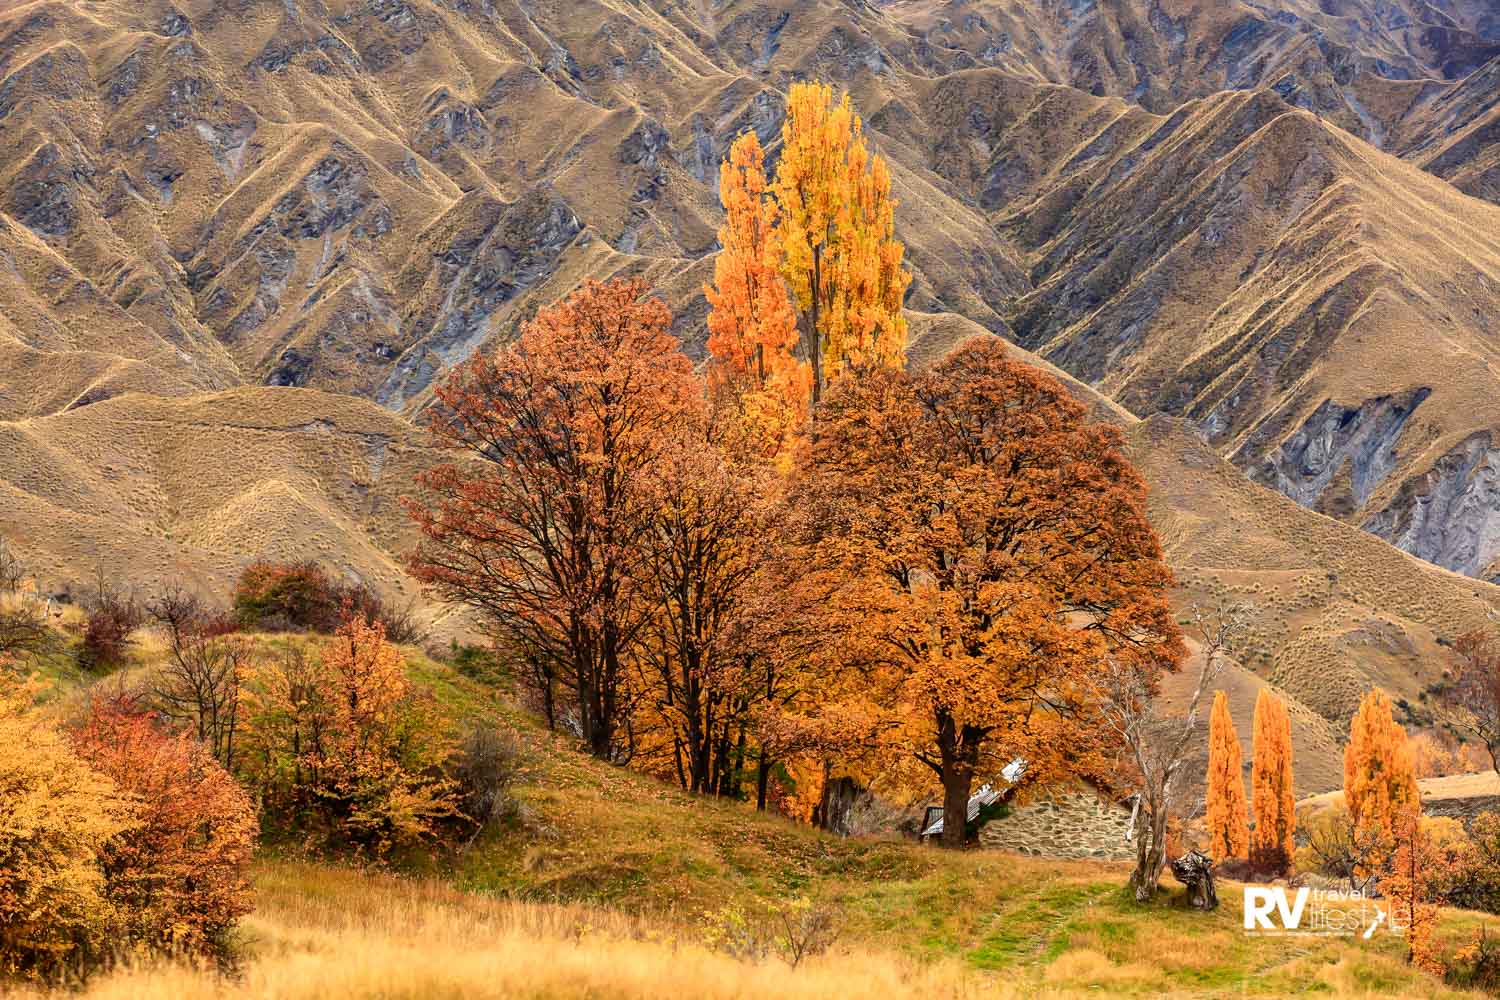 The historic gold-mining ghost town of Macetown, 15km from Arrowtown, Otago, New Zealand. Autumn turns the poplar trees to gold. Picture by Mike Langford